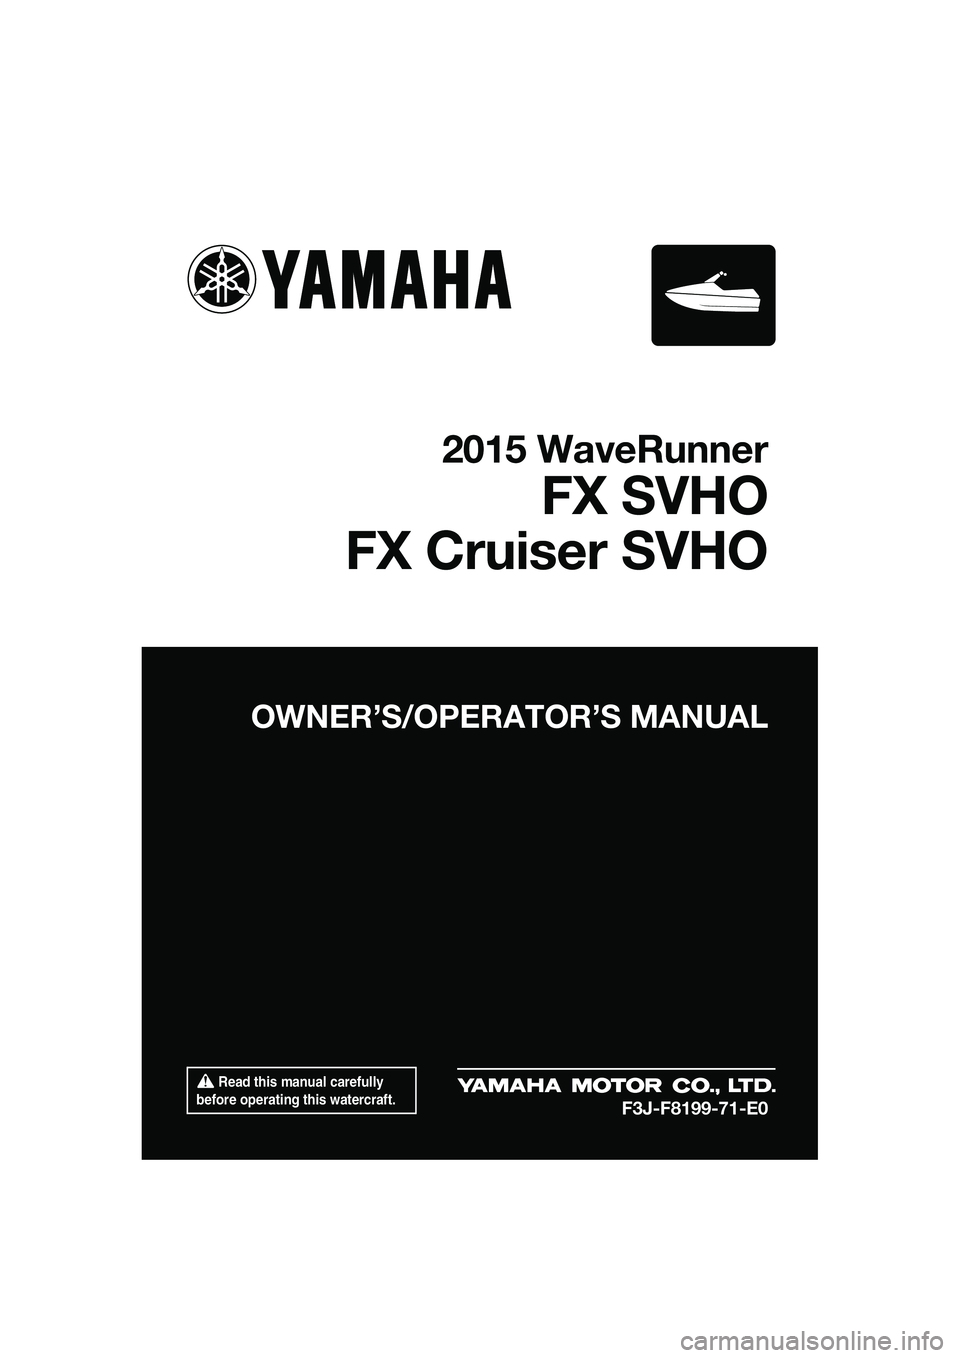 YAMAHA FX SVHO 2015  Owners Manual  Read this manual carefully 
before operating this watercraft.
OWNER’S/OPERAT OR’S MANUAL
2015 WaveRunner
FX SVHO
FX Cruiser SVHO
F3J-F8199-71-E0
UF3J71E0.book  Page 1  Friday, June 27, 2014  1:50